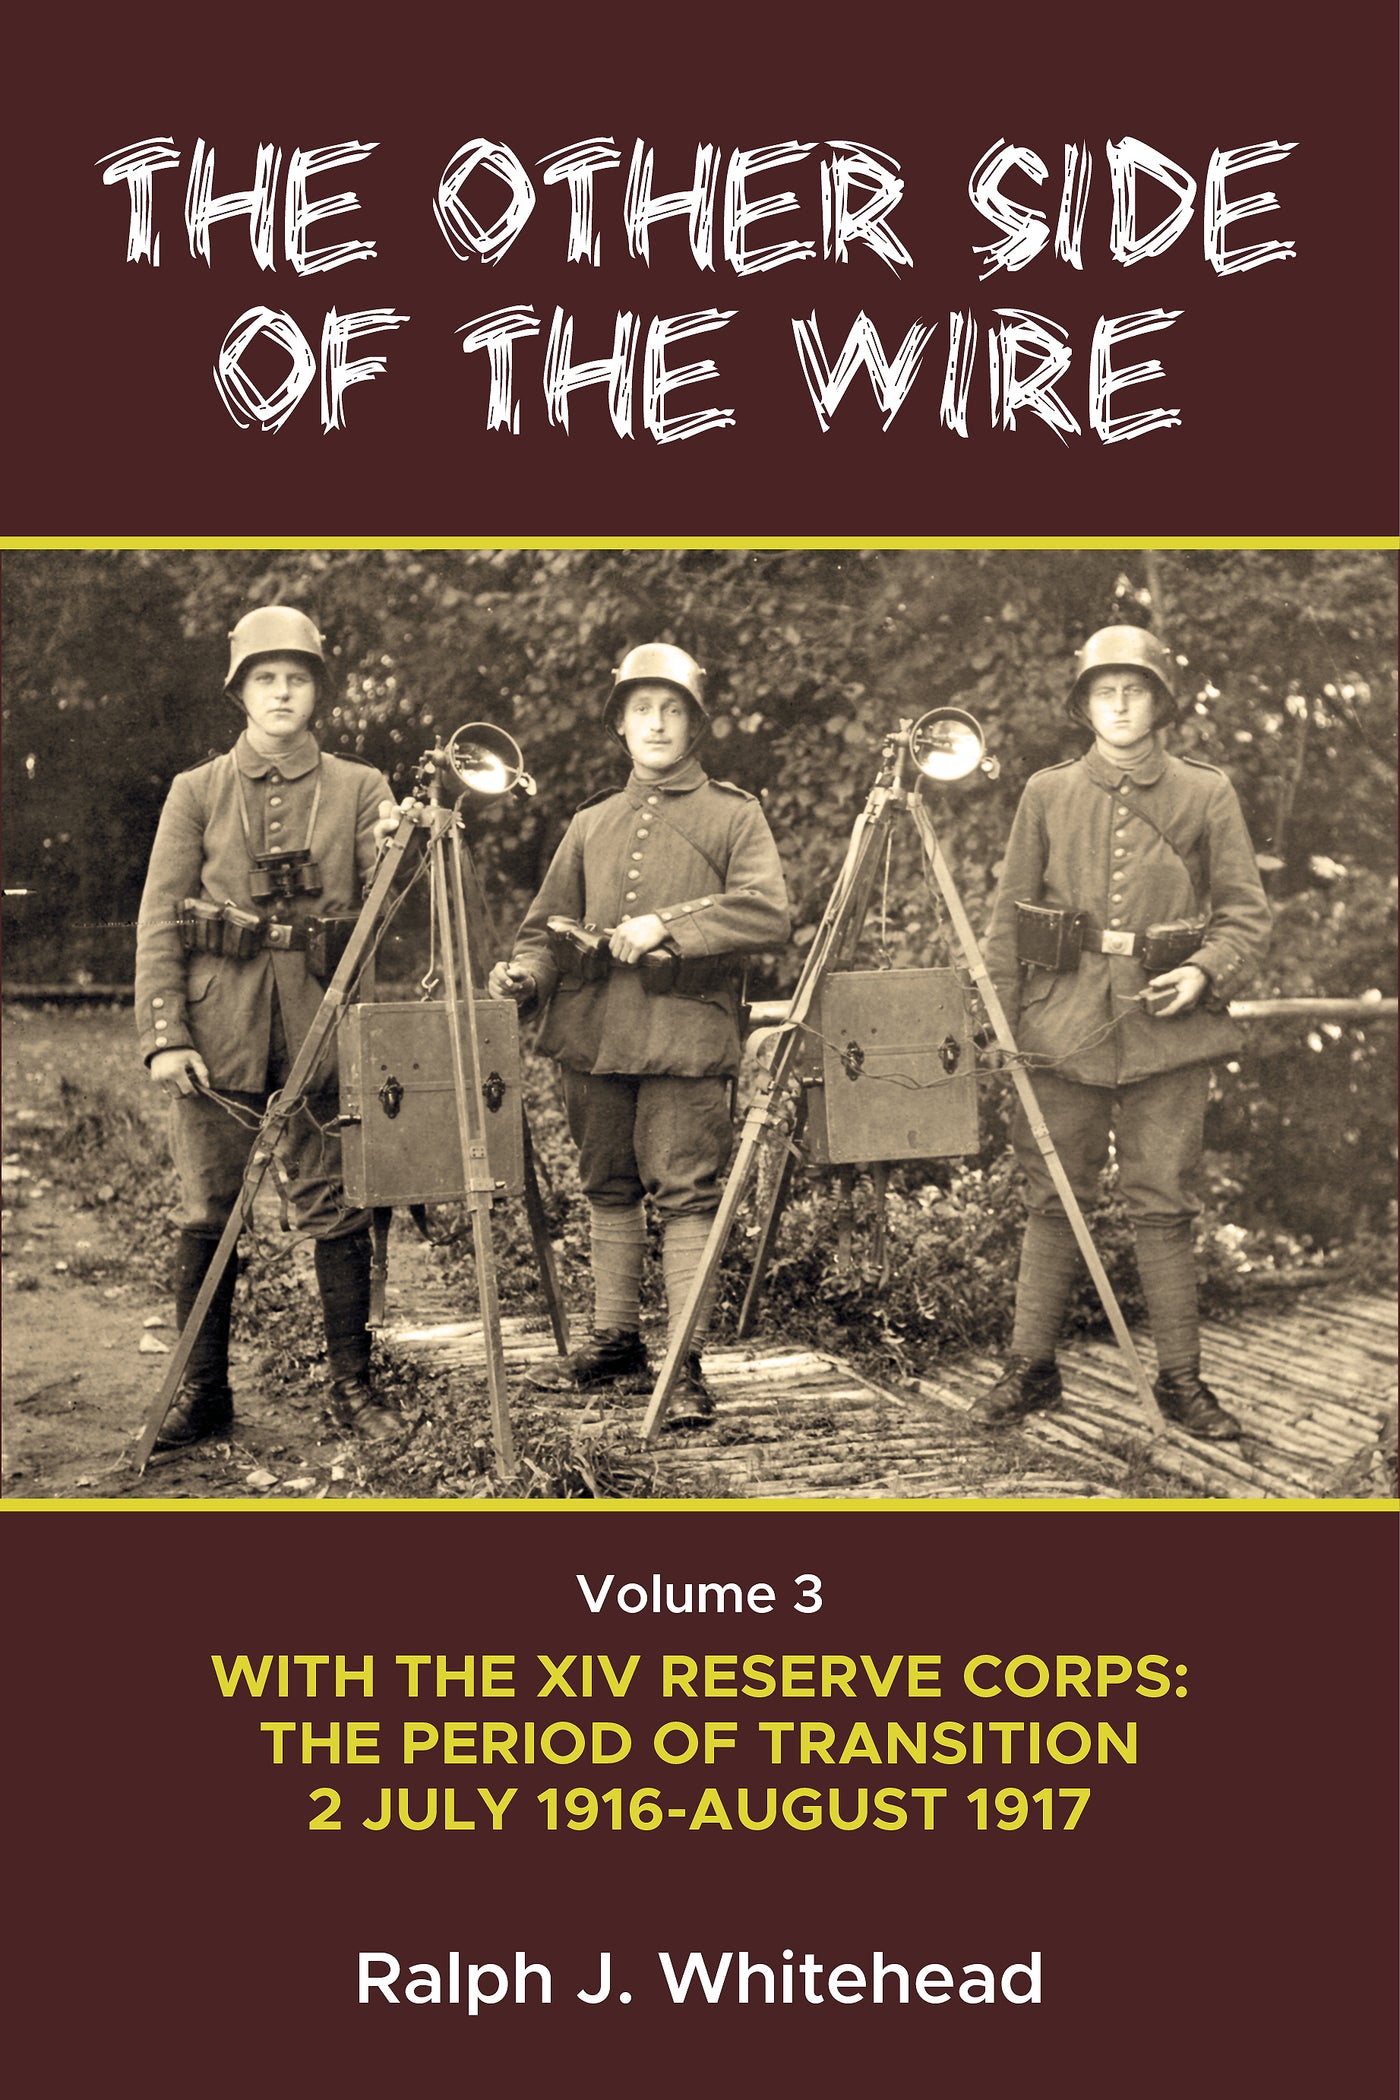 The Other Side of the Wire. Volume 3